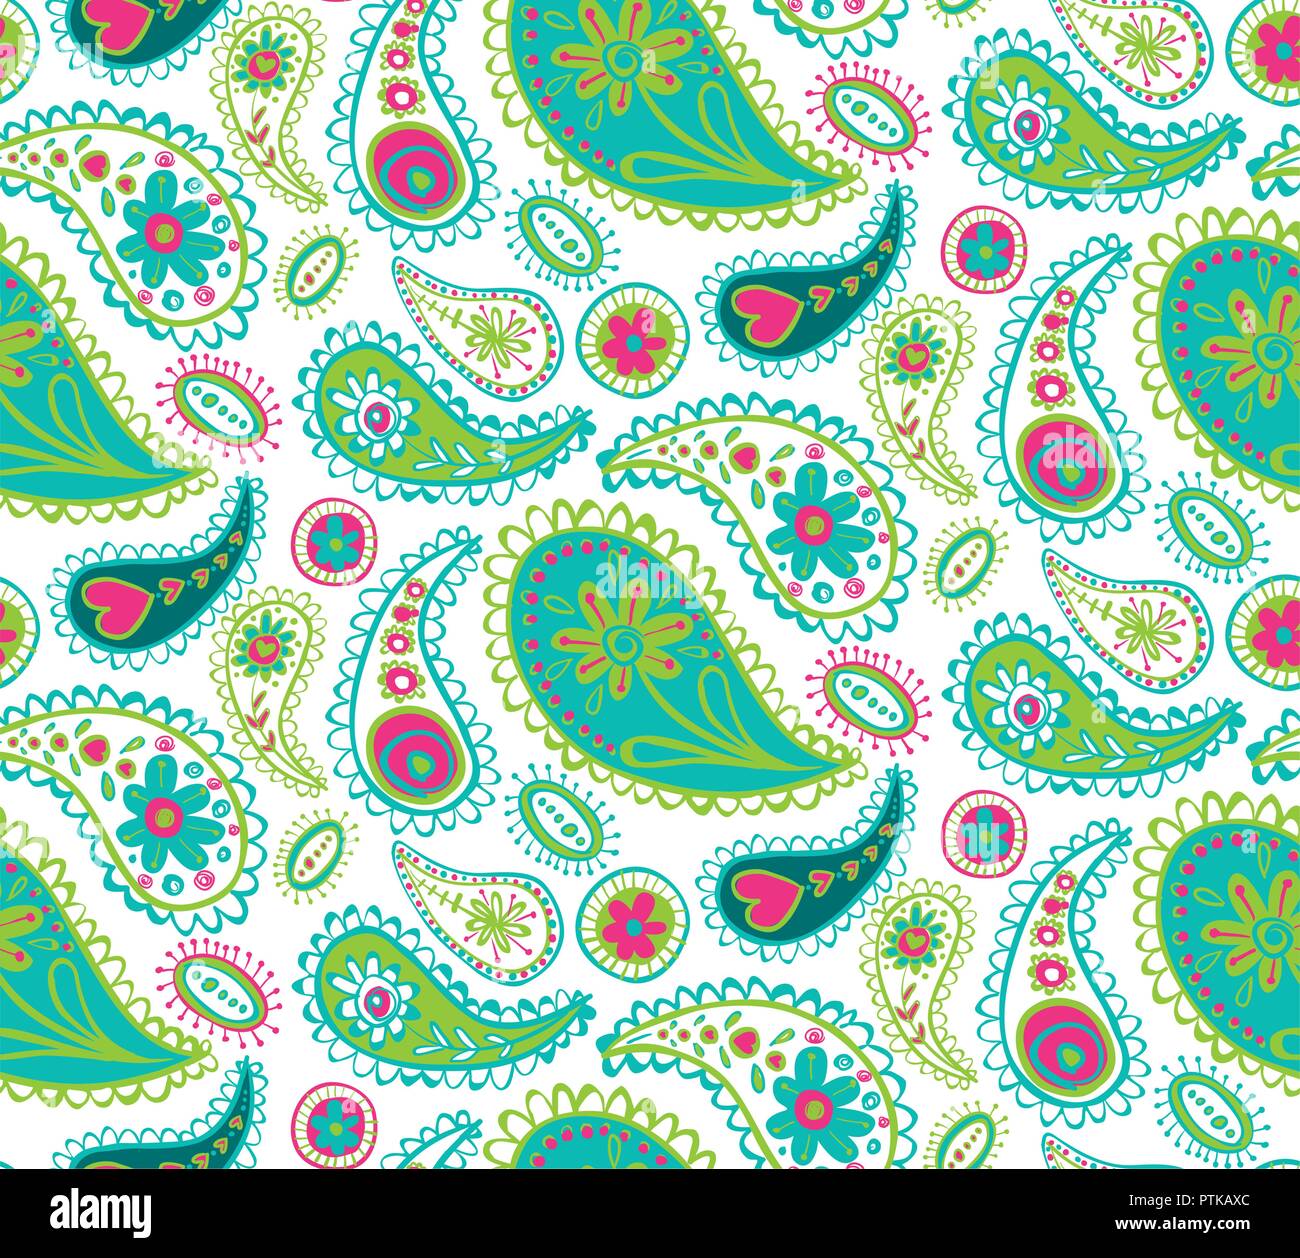 Vector decorative paisley design in greens, aquamarines and pinks pattern background. Use for fabrics, quilts, wallpapers, scrapbooking and crafts Stock Vector